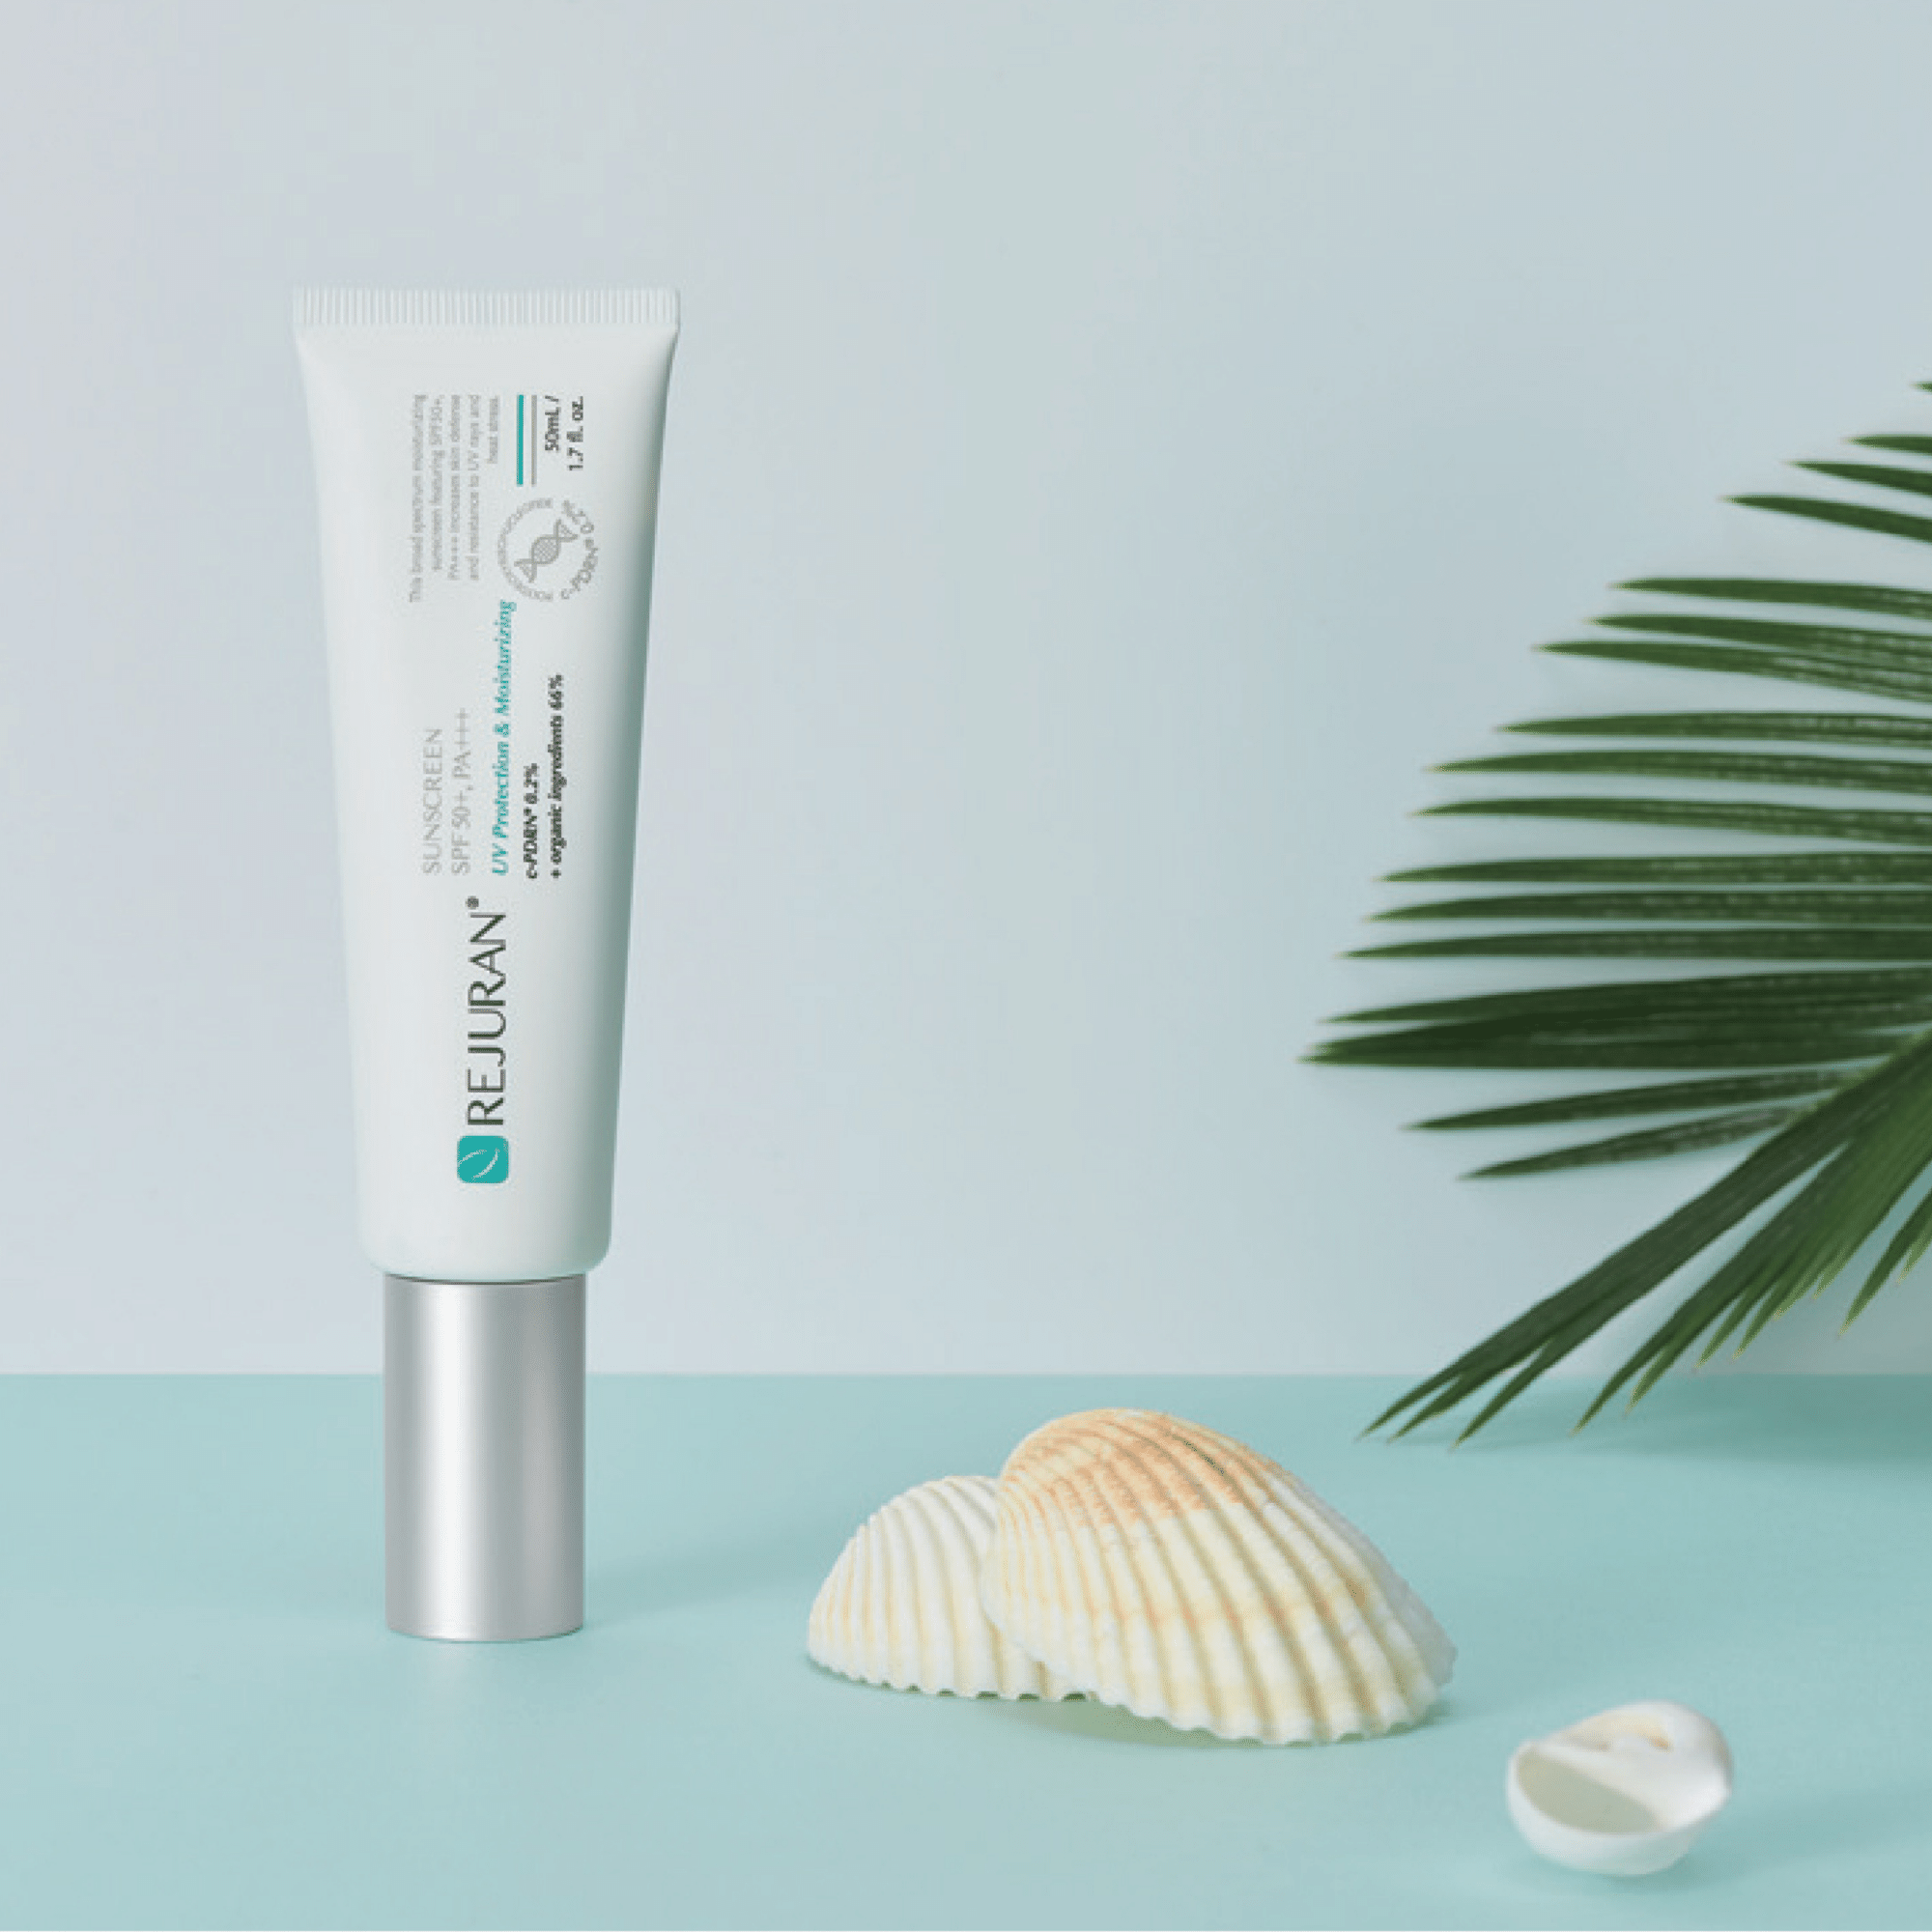 rejuran malaysia sunscreen 50+ PA+++ a rejuvenating and moisturizing UV protector without ever feeling sticky and leaving a white residue